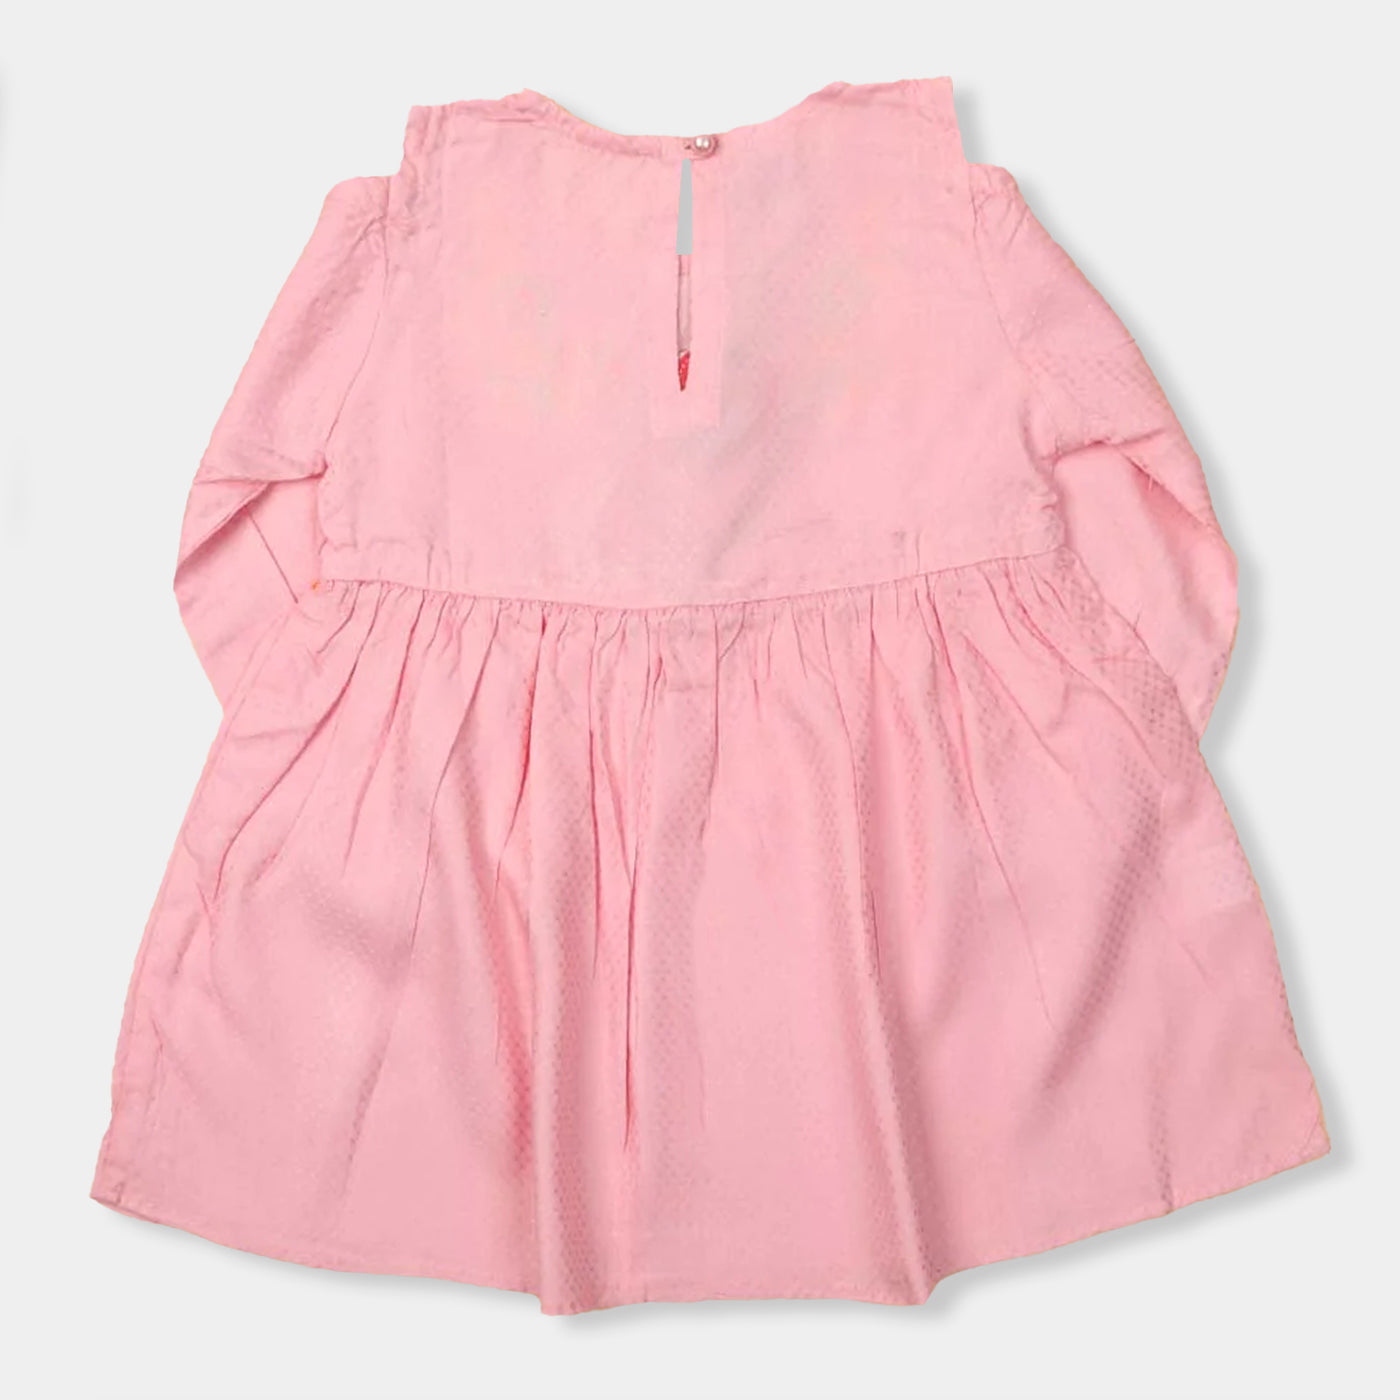 Embroidered Pom Pom Top For Girls - Pink